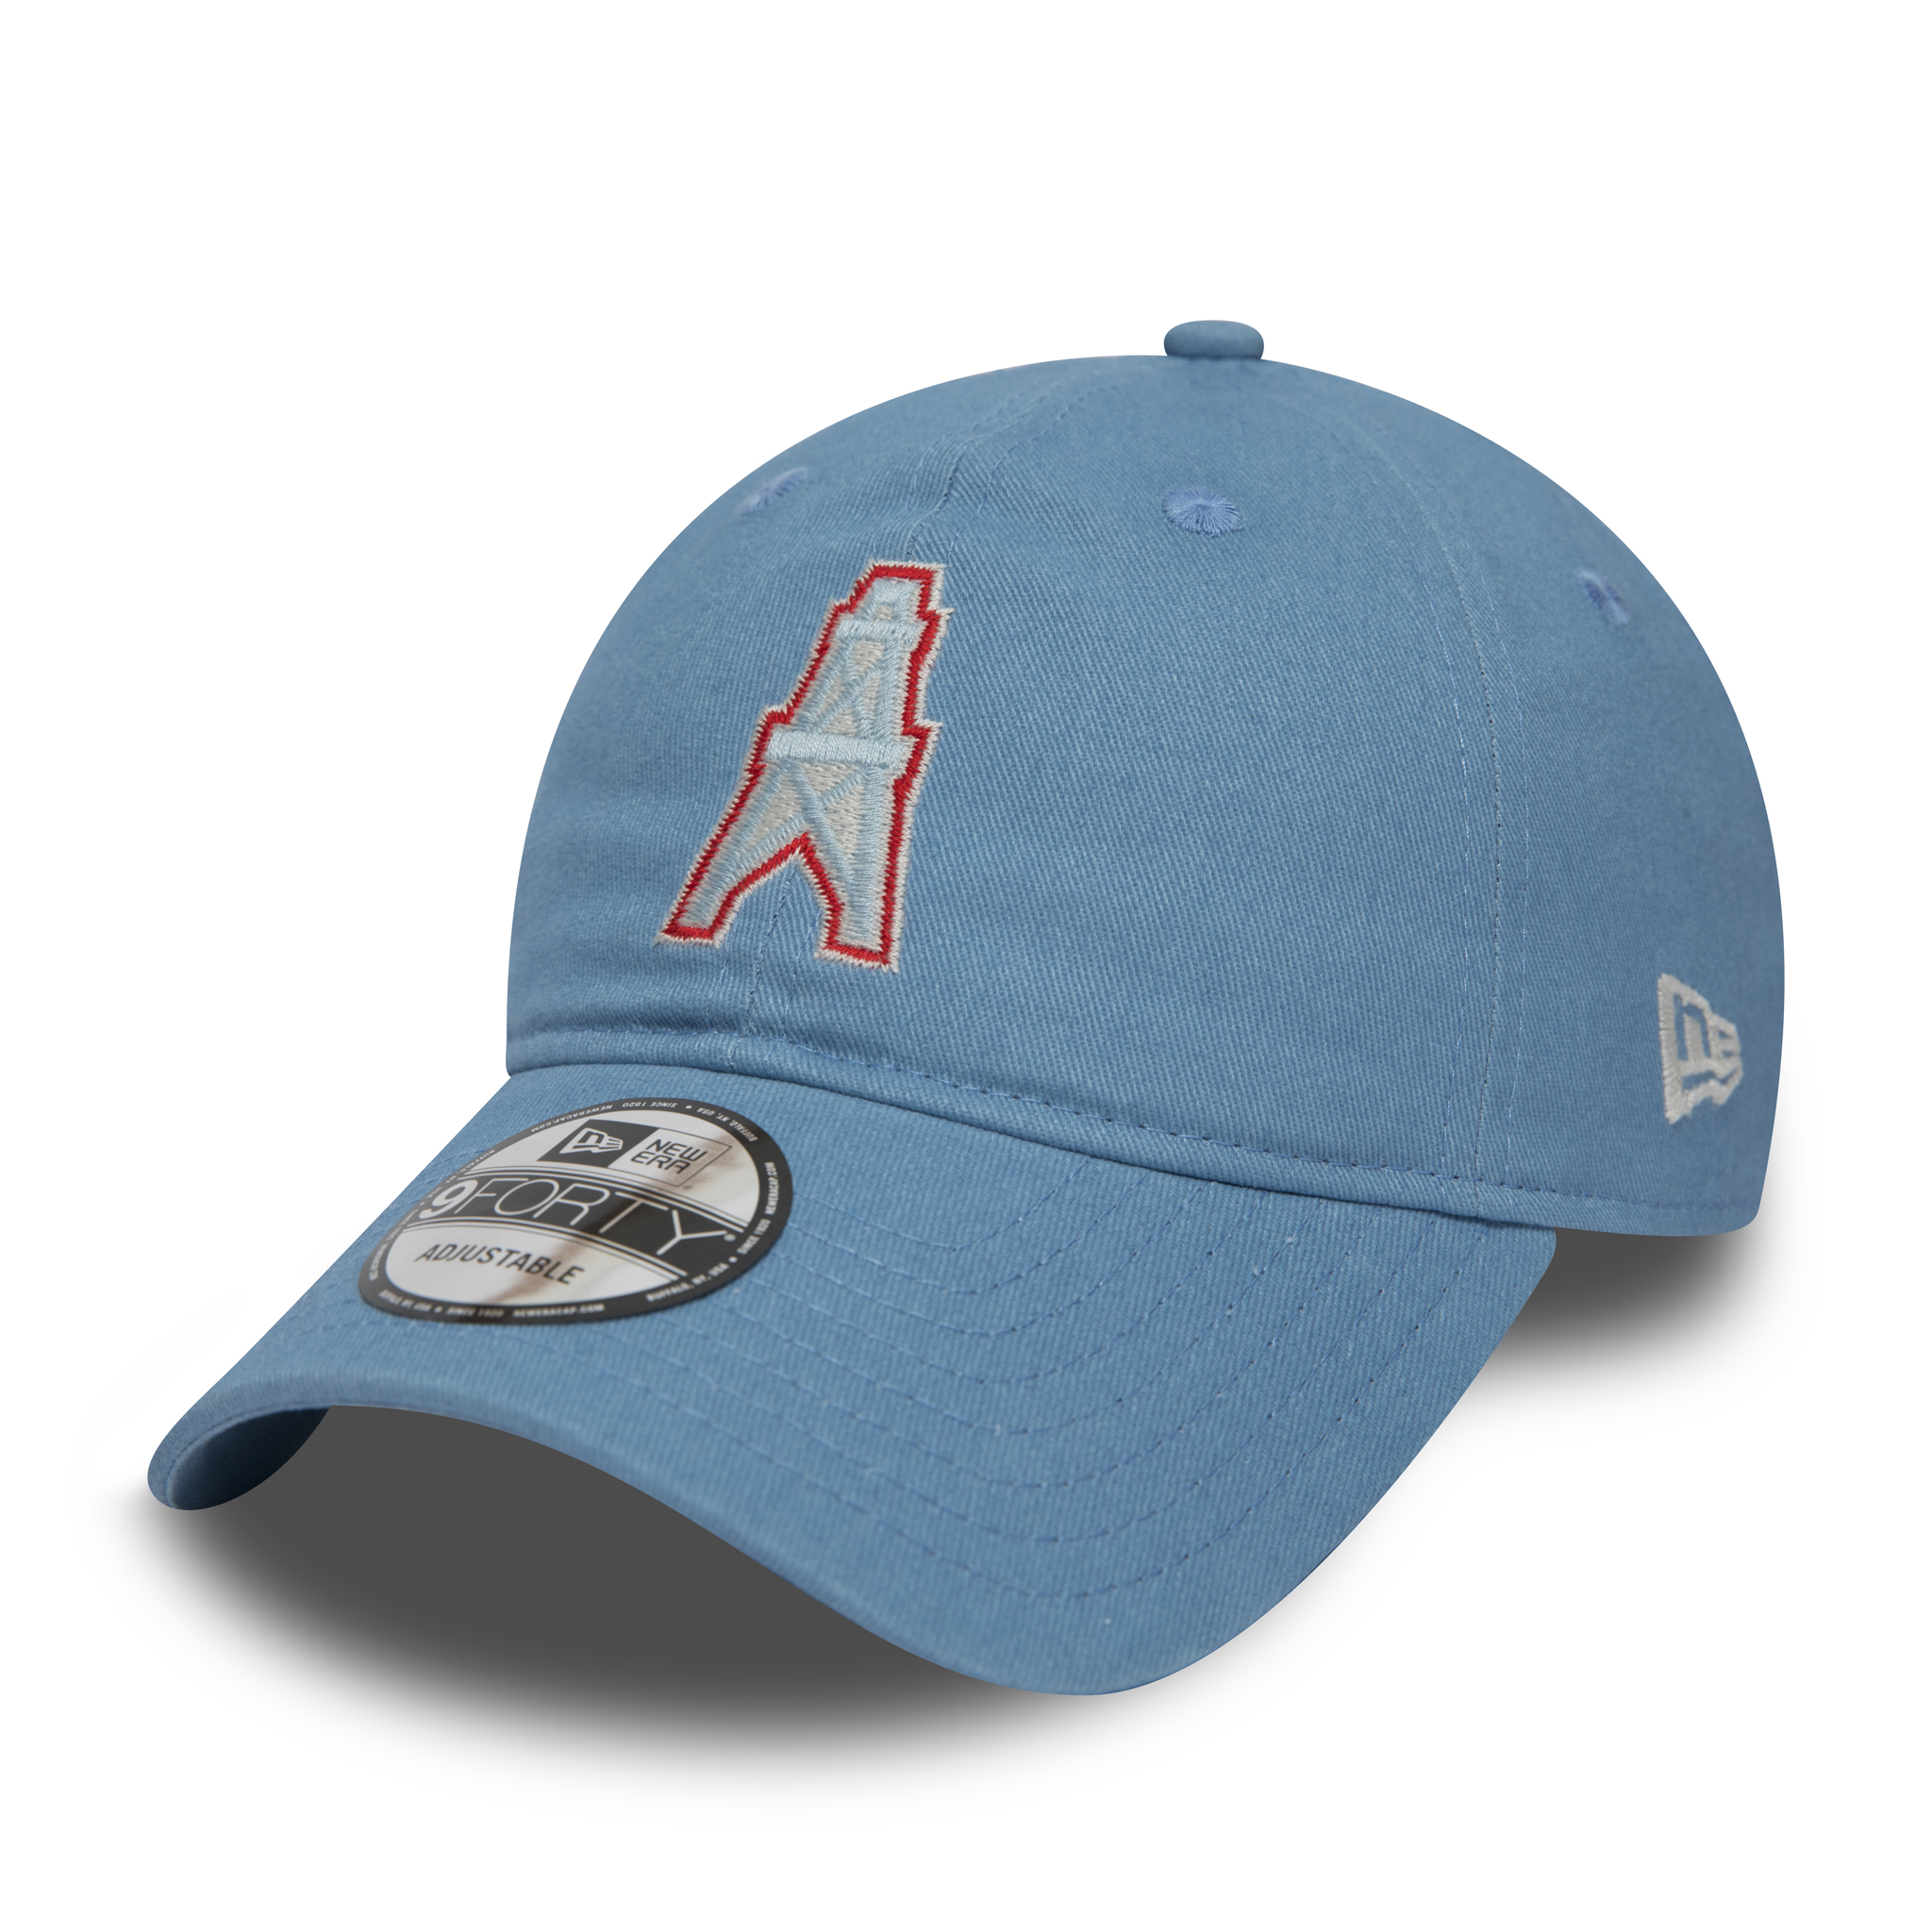 Houston Oilers Historic Blue 9FORTY Cap